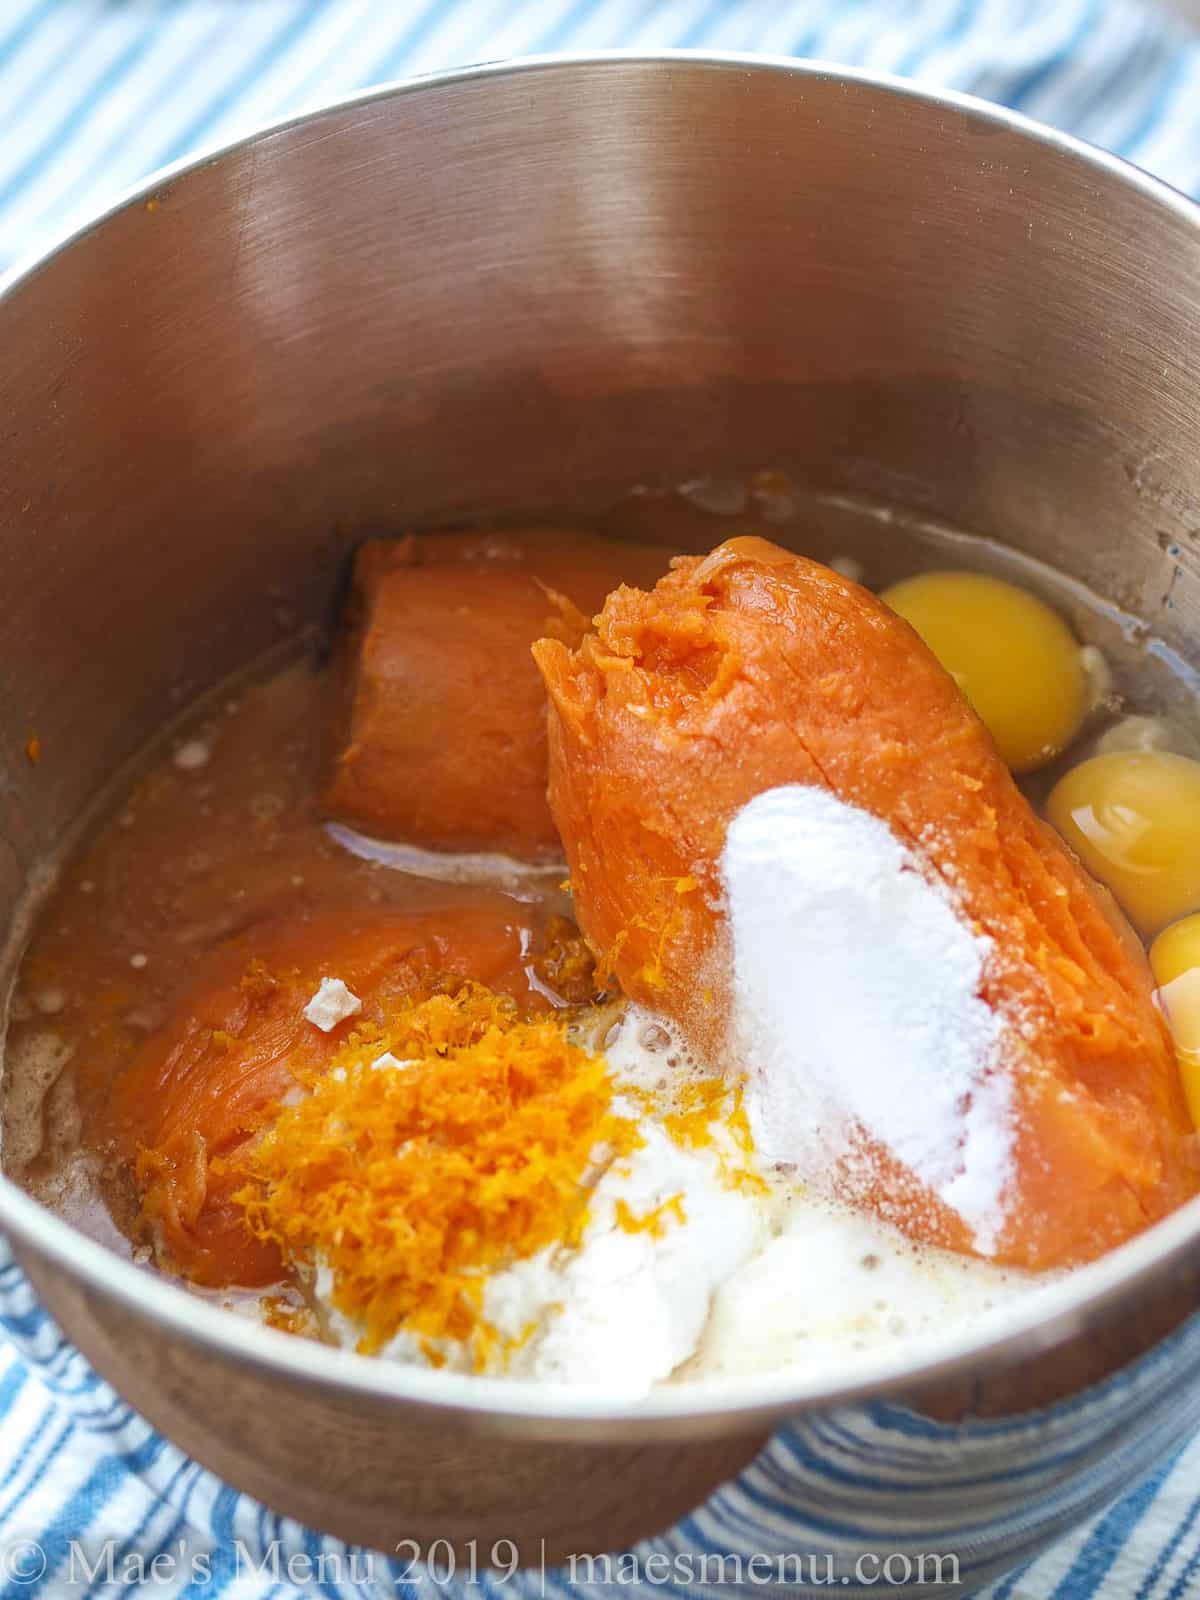 All the ingredients for a healthy sweet potato soufflé in a metal mixing bowl